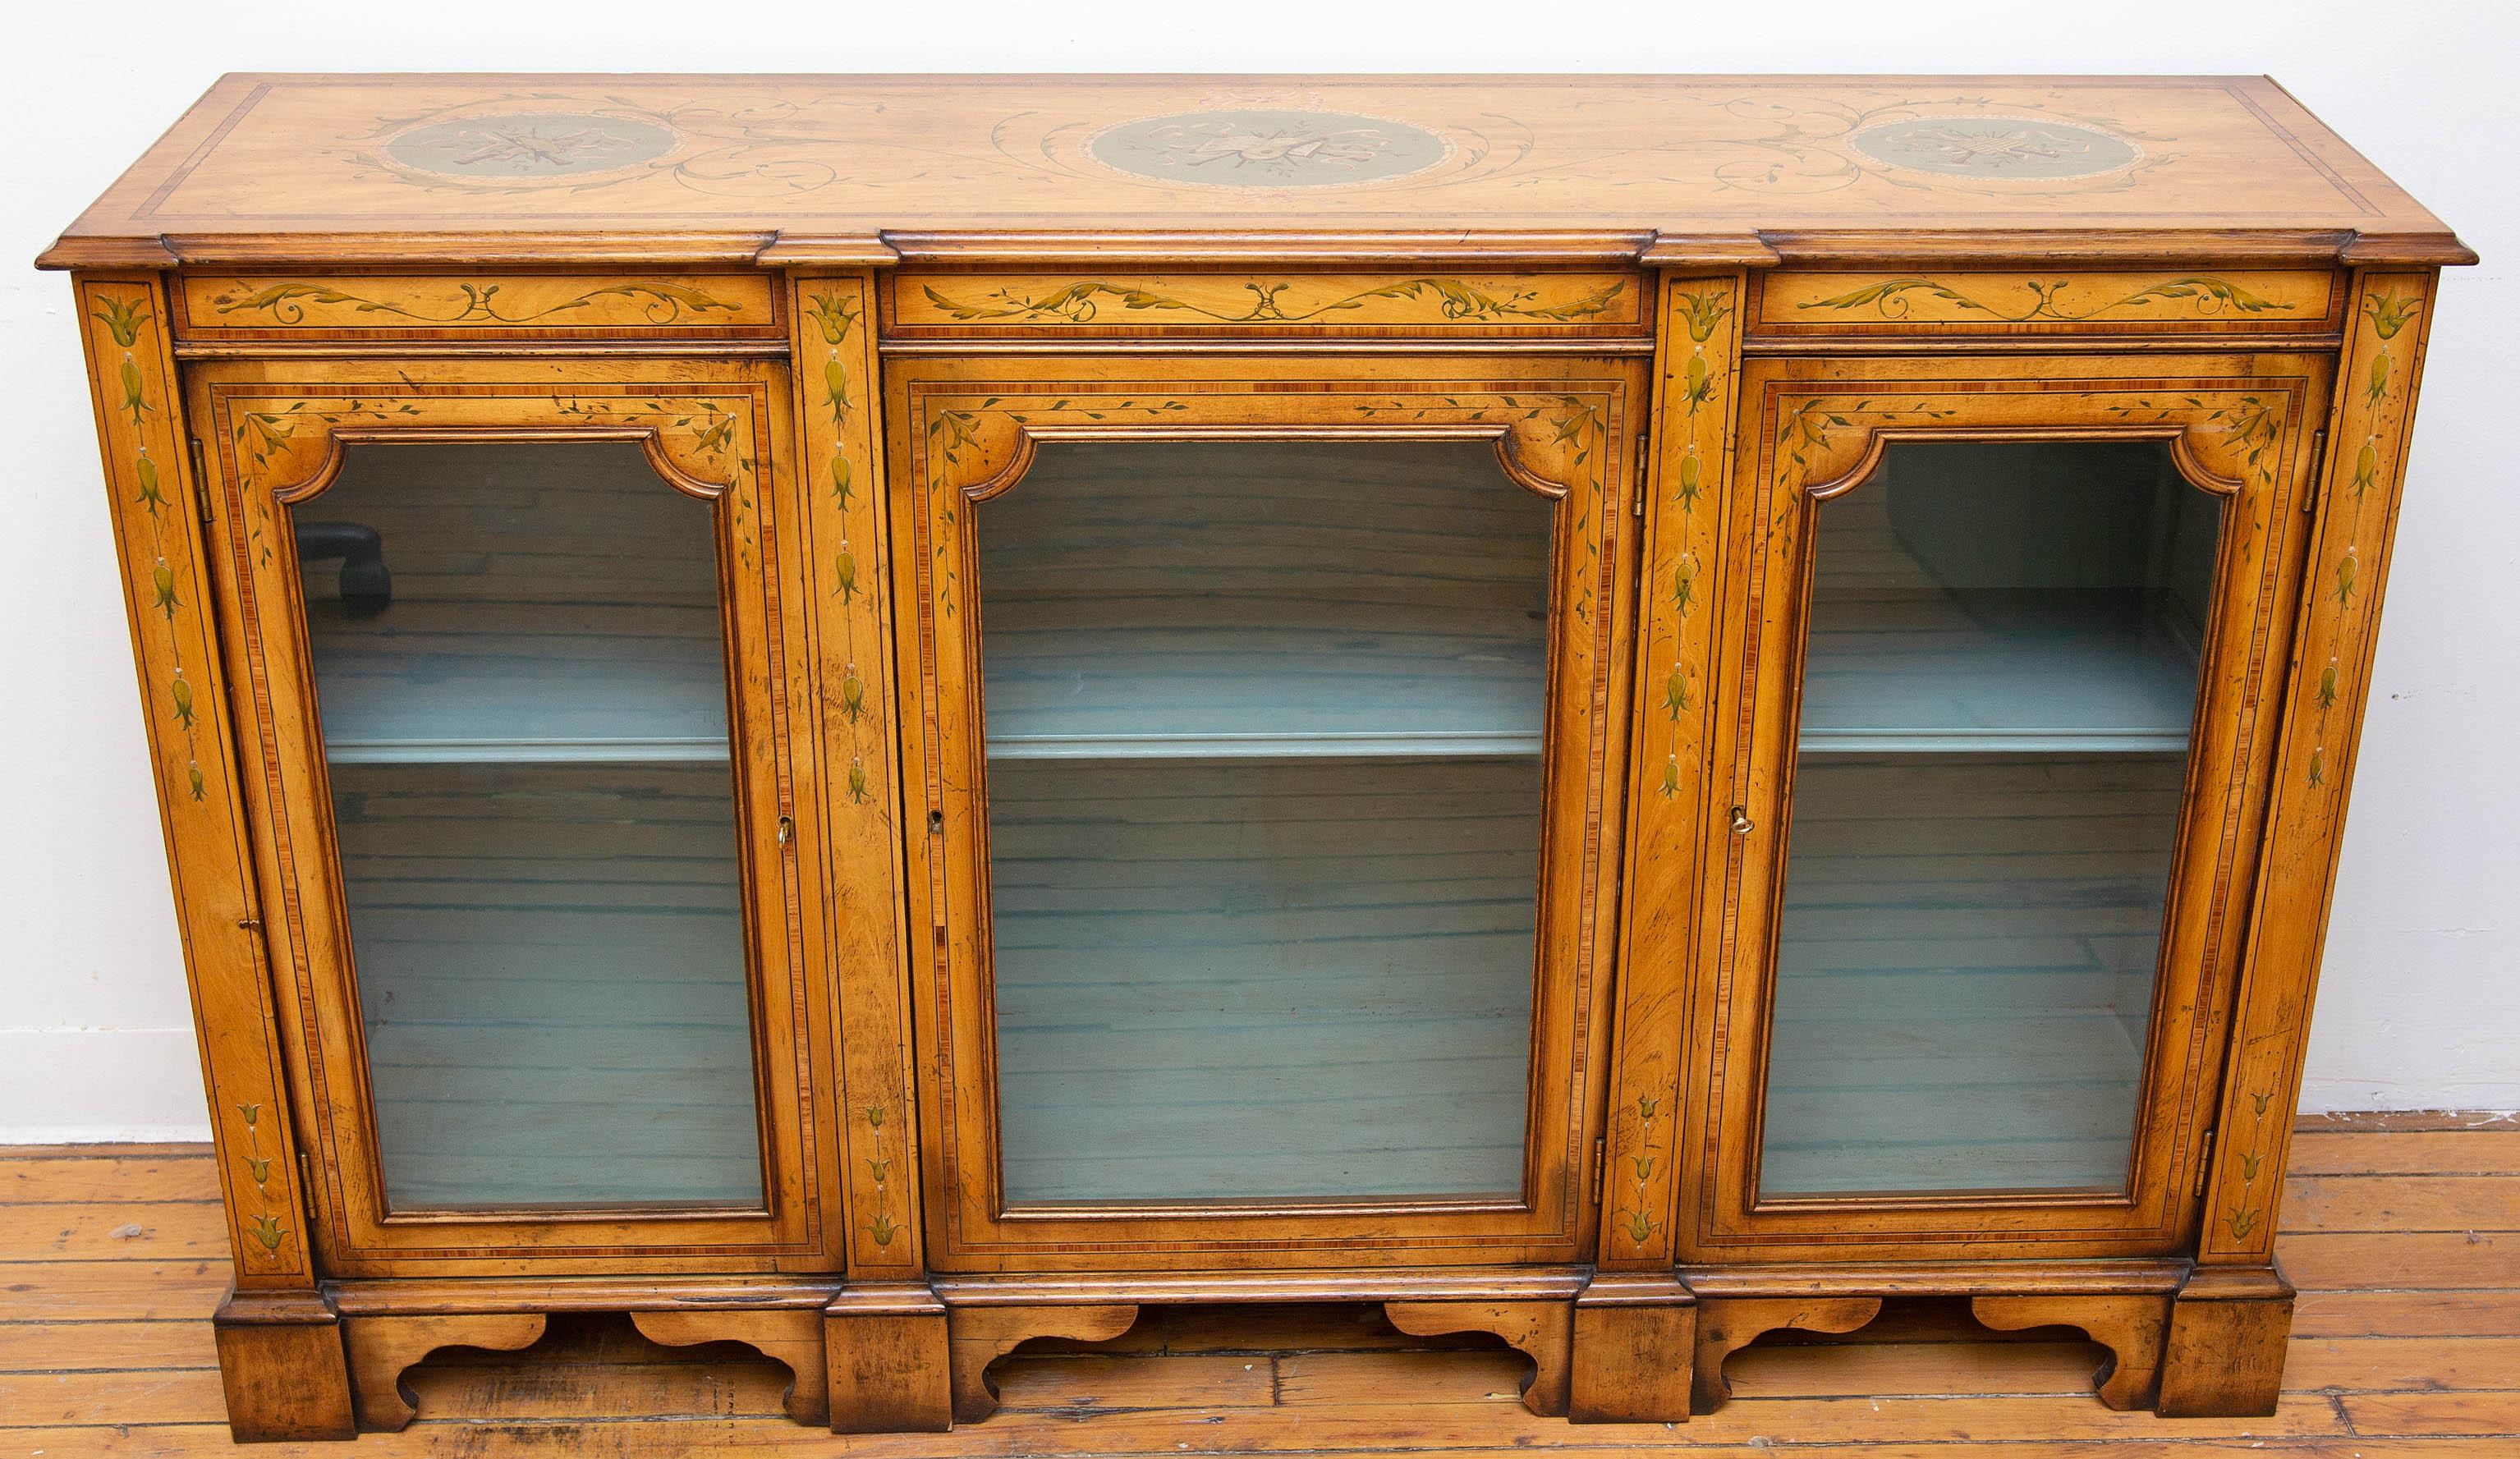 Adams style credenza vitrine. Hand painted fruitwood. With banding inlay. One shelf in each section. Interior is painted slate blue, but may be painted any color, circa 1940s. Please, contact us for shipping options.
Presented by Joseph Dasta